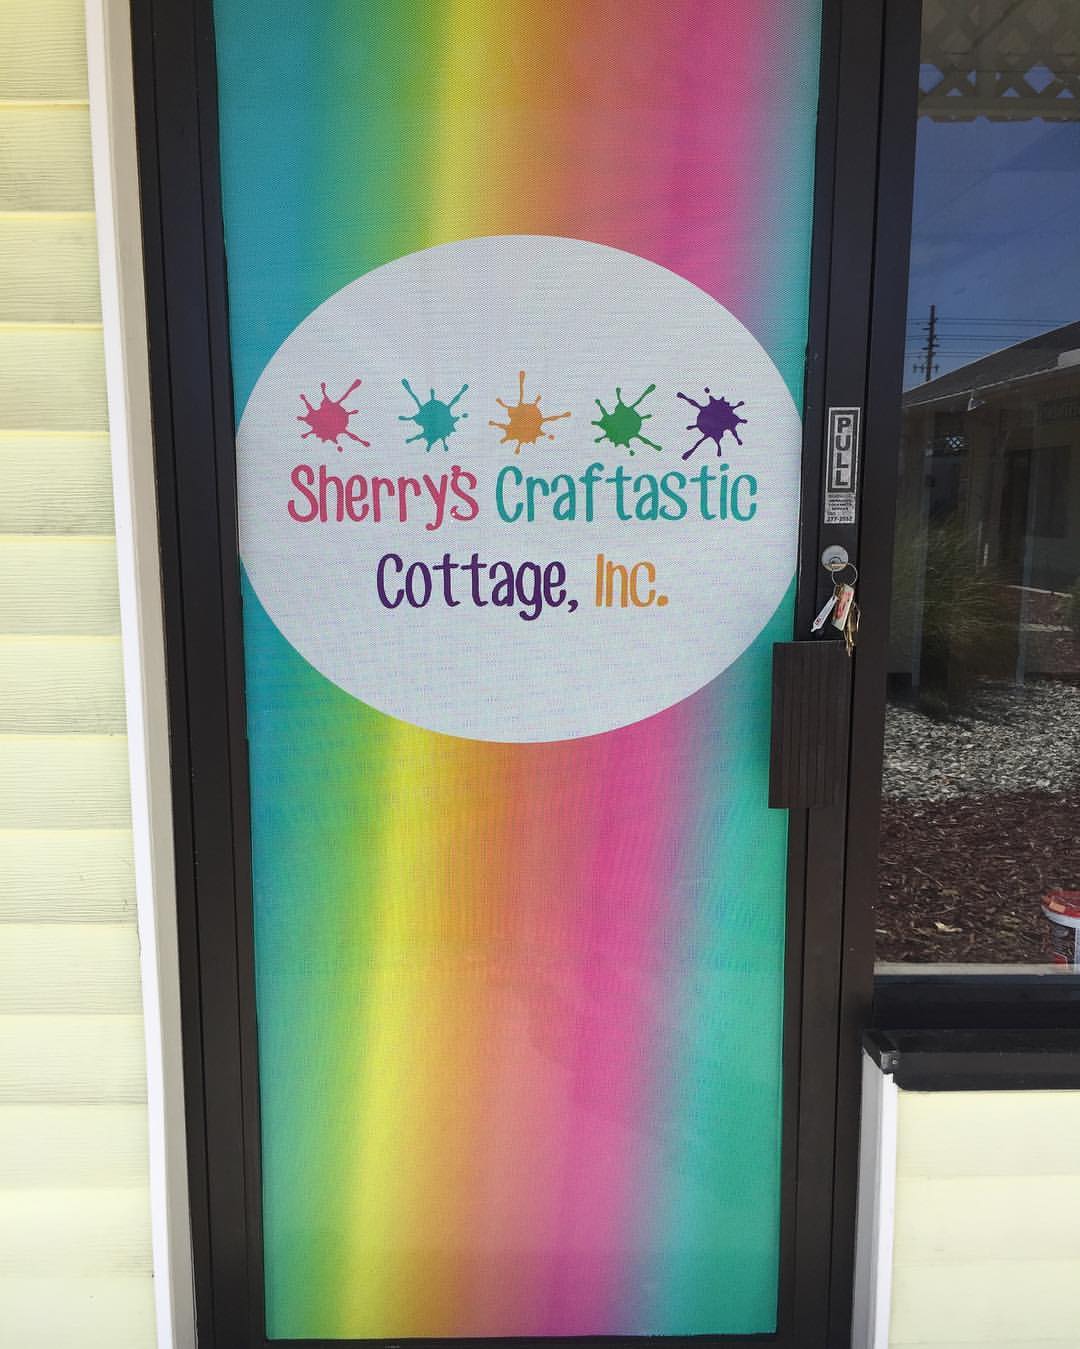 Sherry's Craftastic Cottage